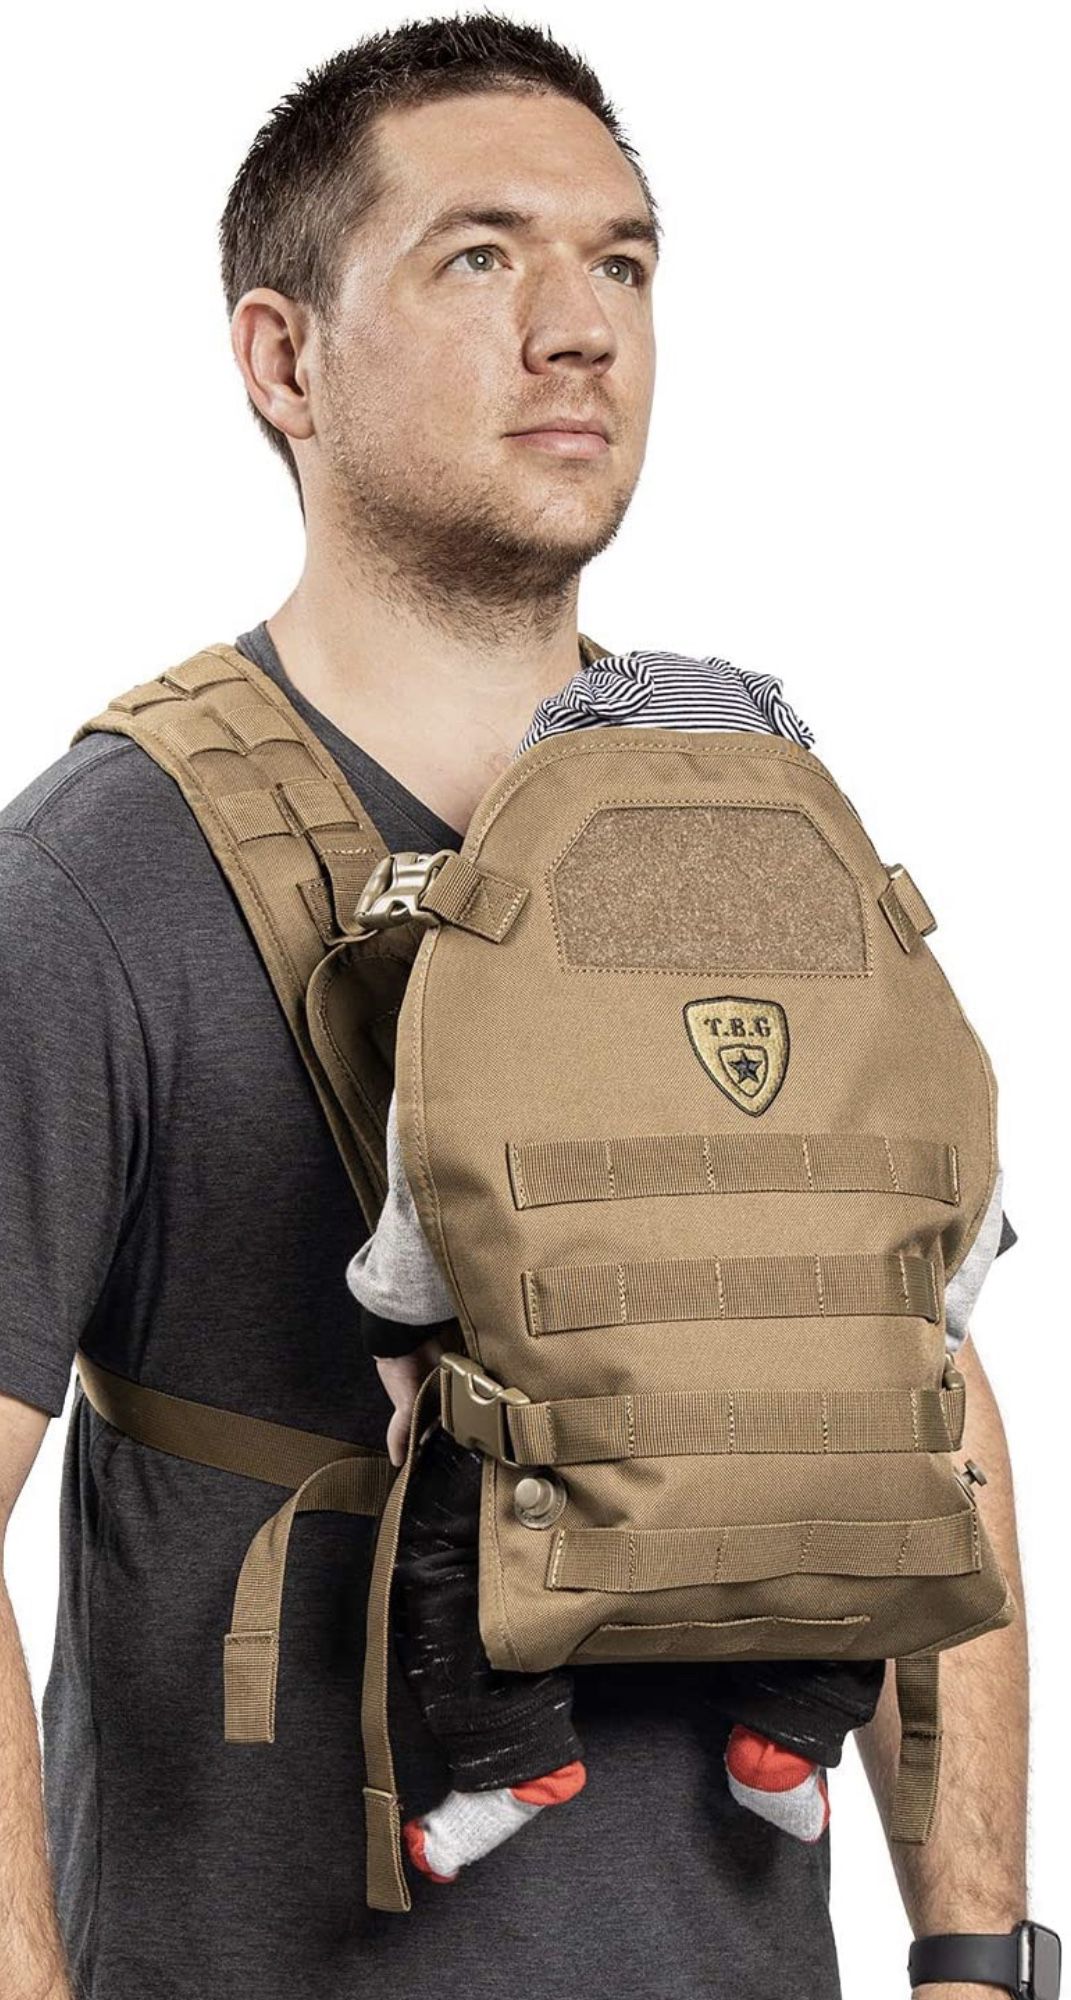 TBG - Mens Tactical Baby Carrier for Infants and Toddlers 8-33 lbs - Compact (Coyote Brown)